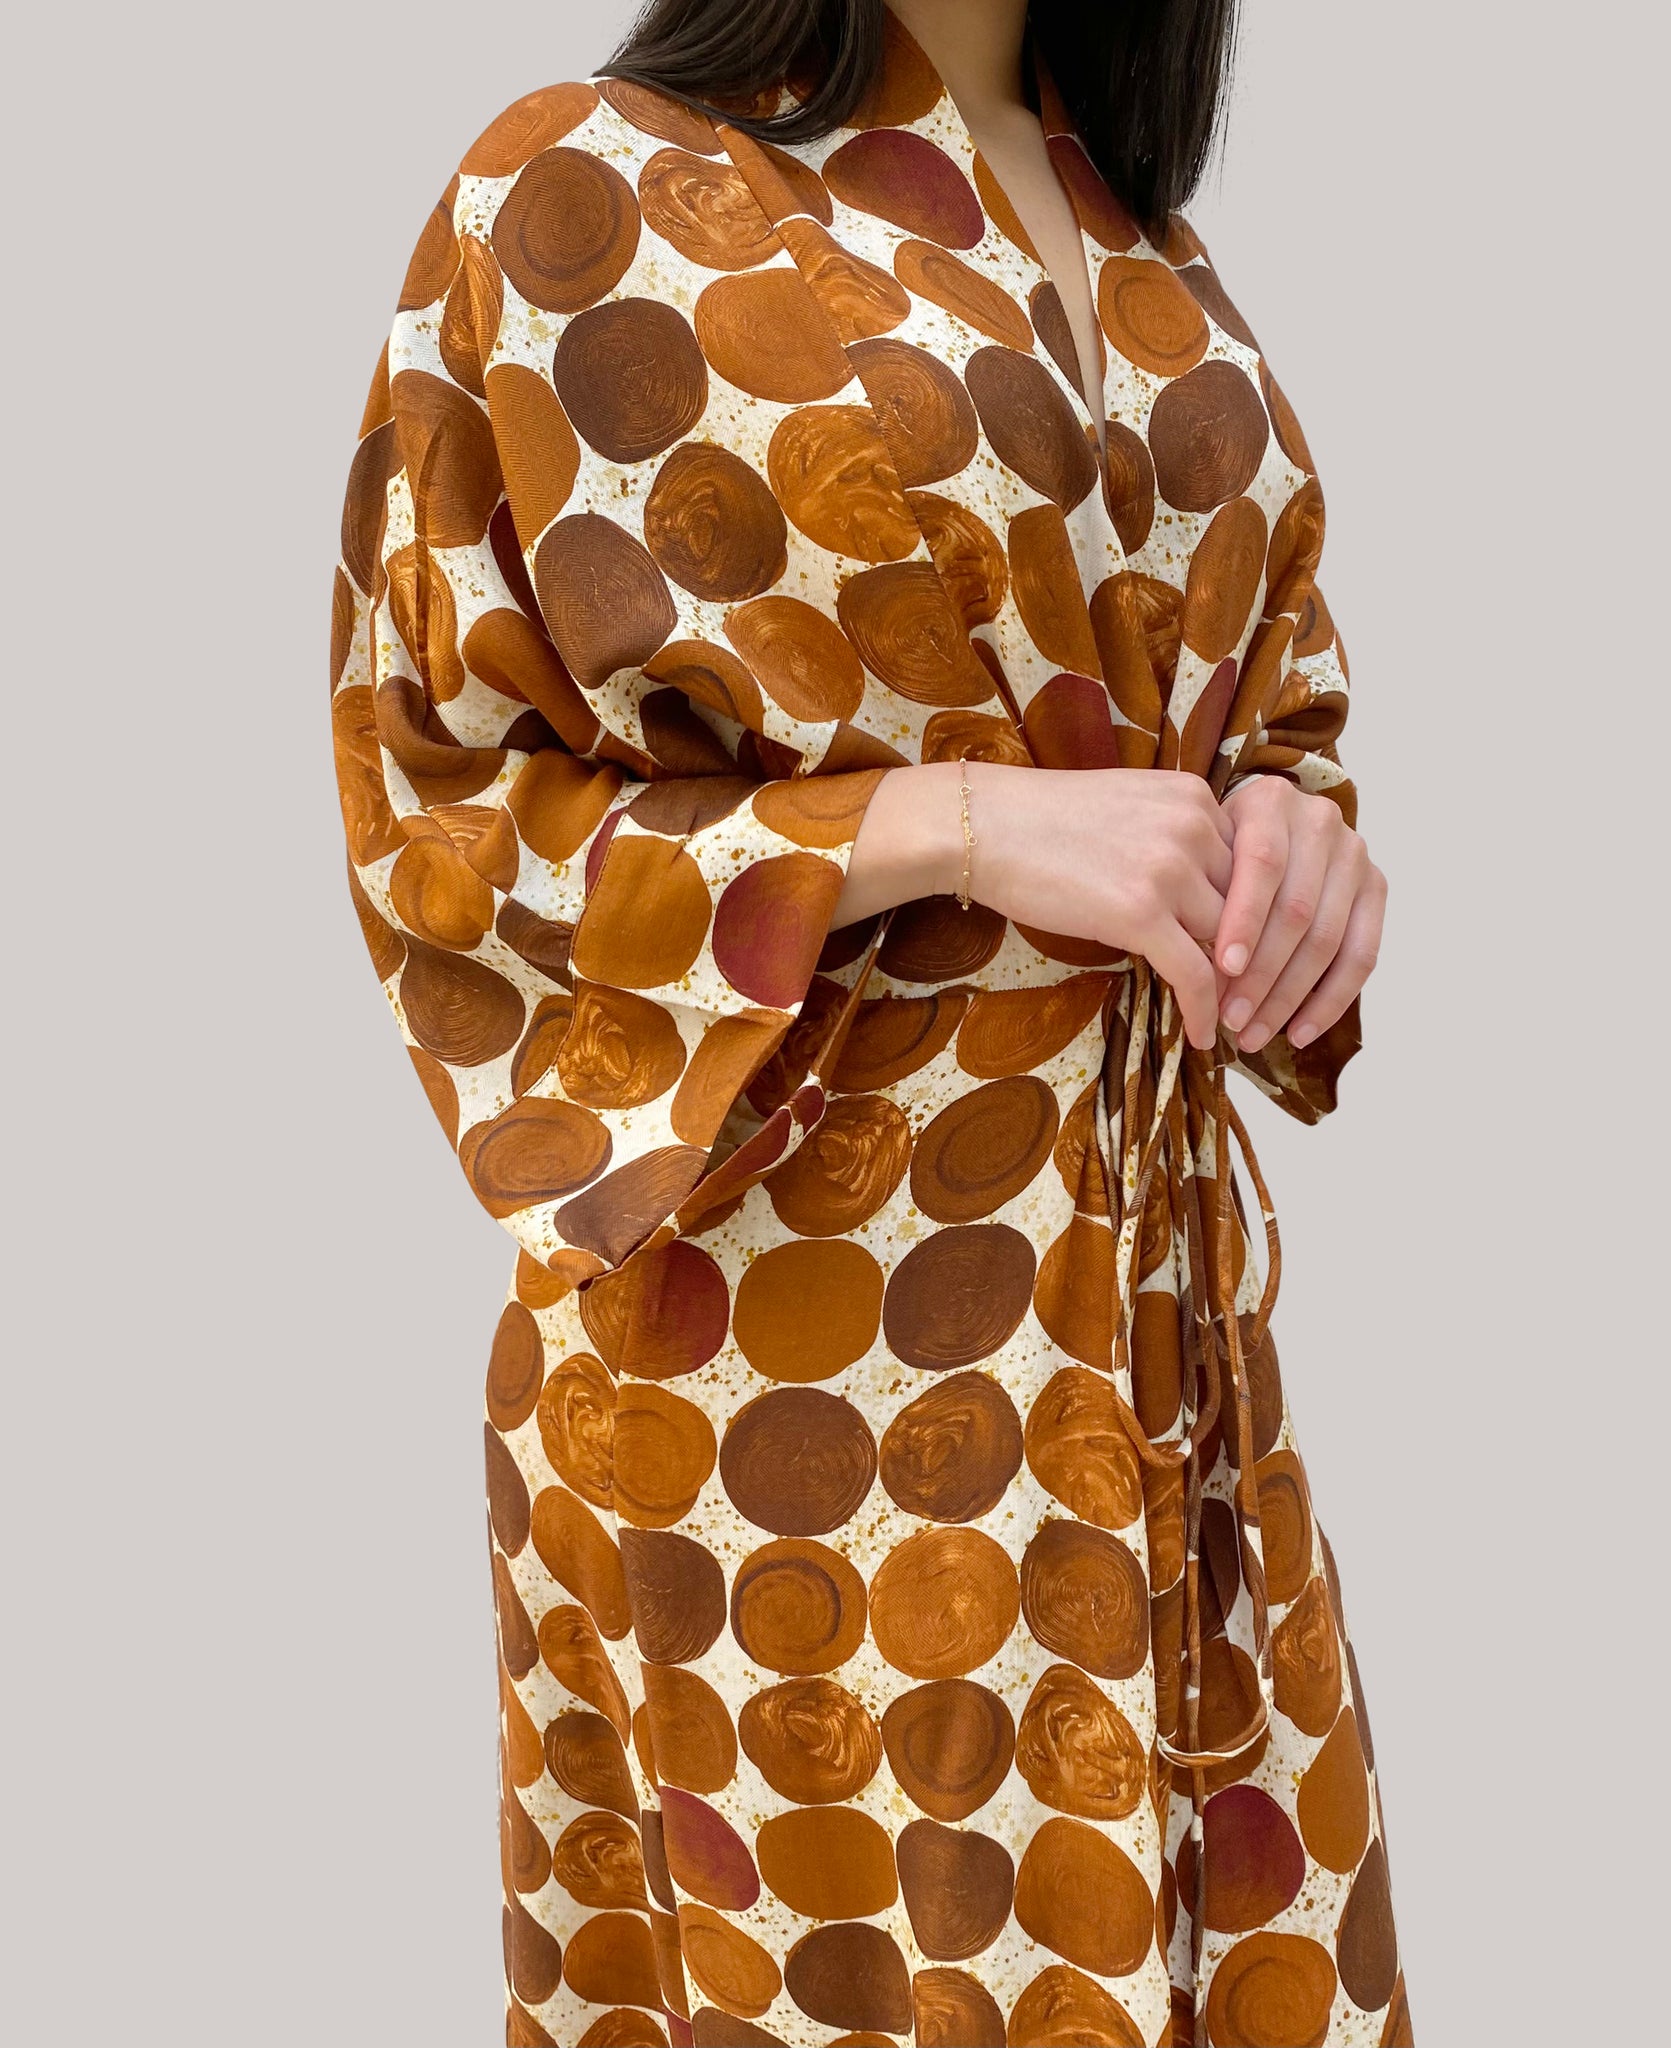 Cashmere White & Brown circles Dress with Belt